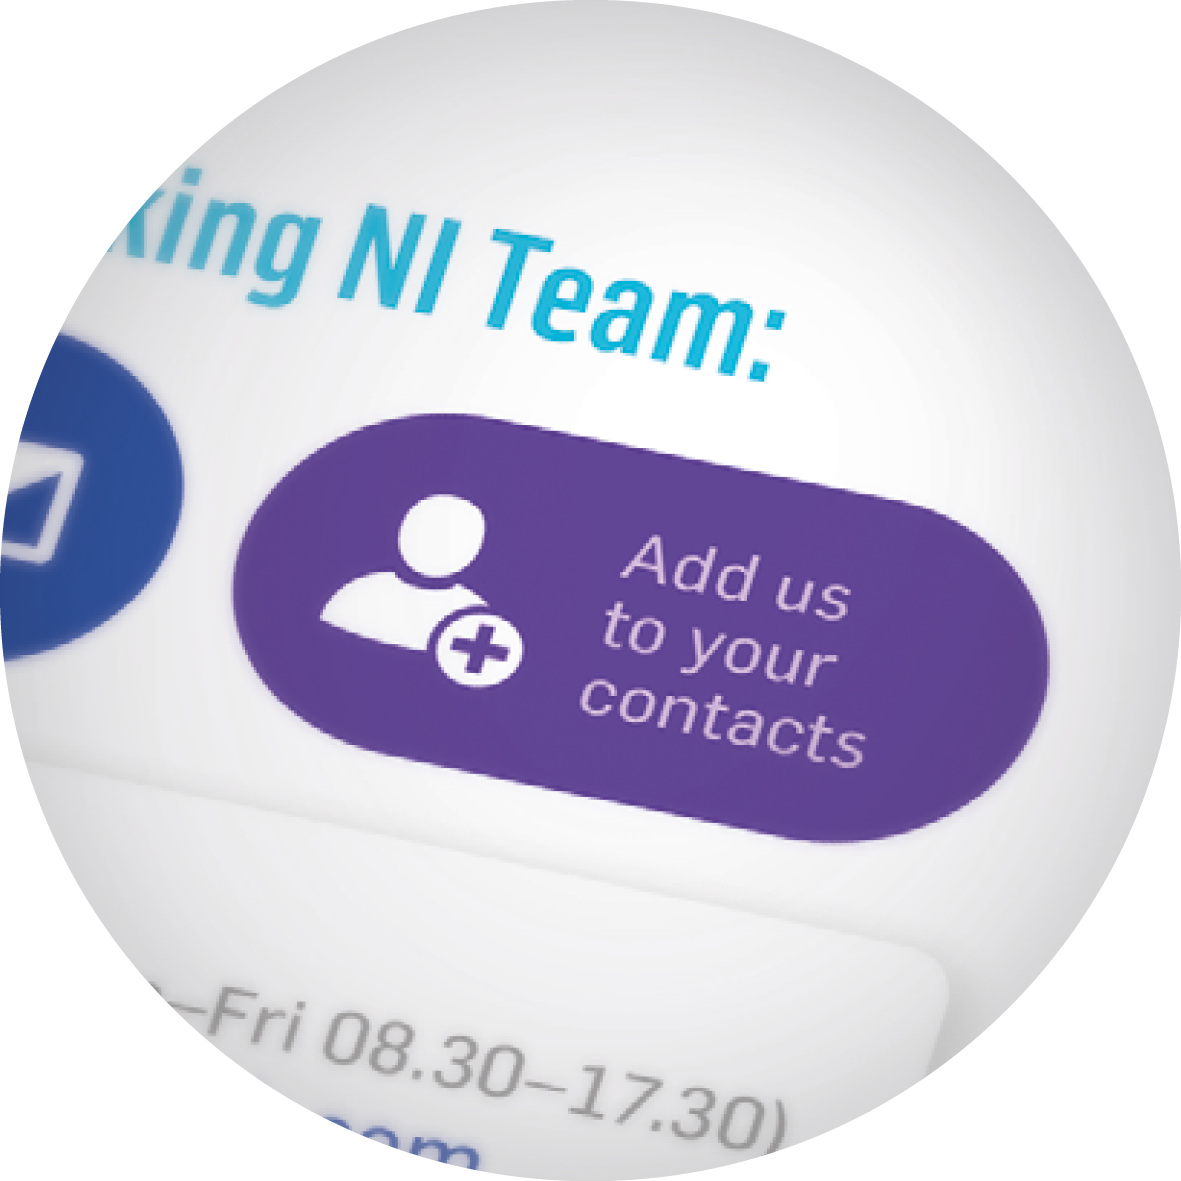 Purple digital button on-screen featuring a person icon and 'Add us to your contacts' text.